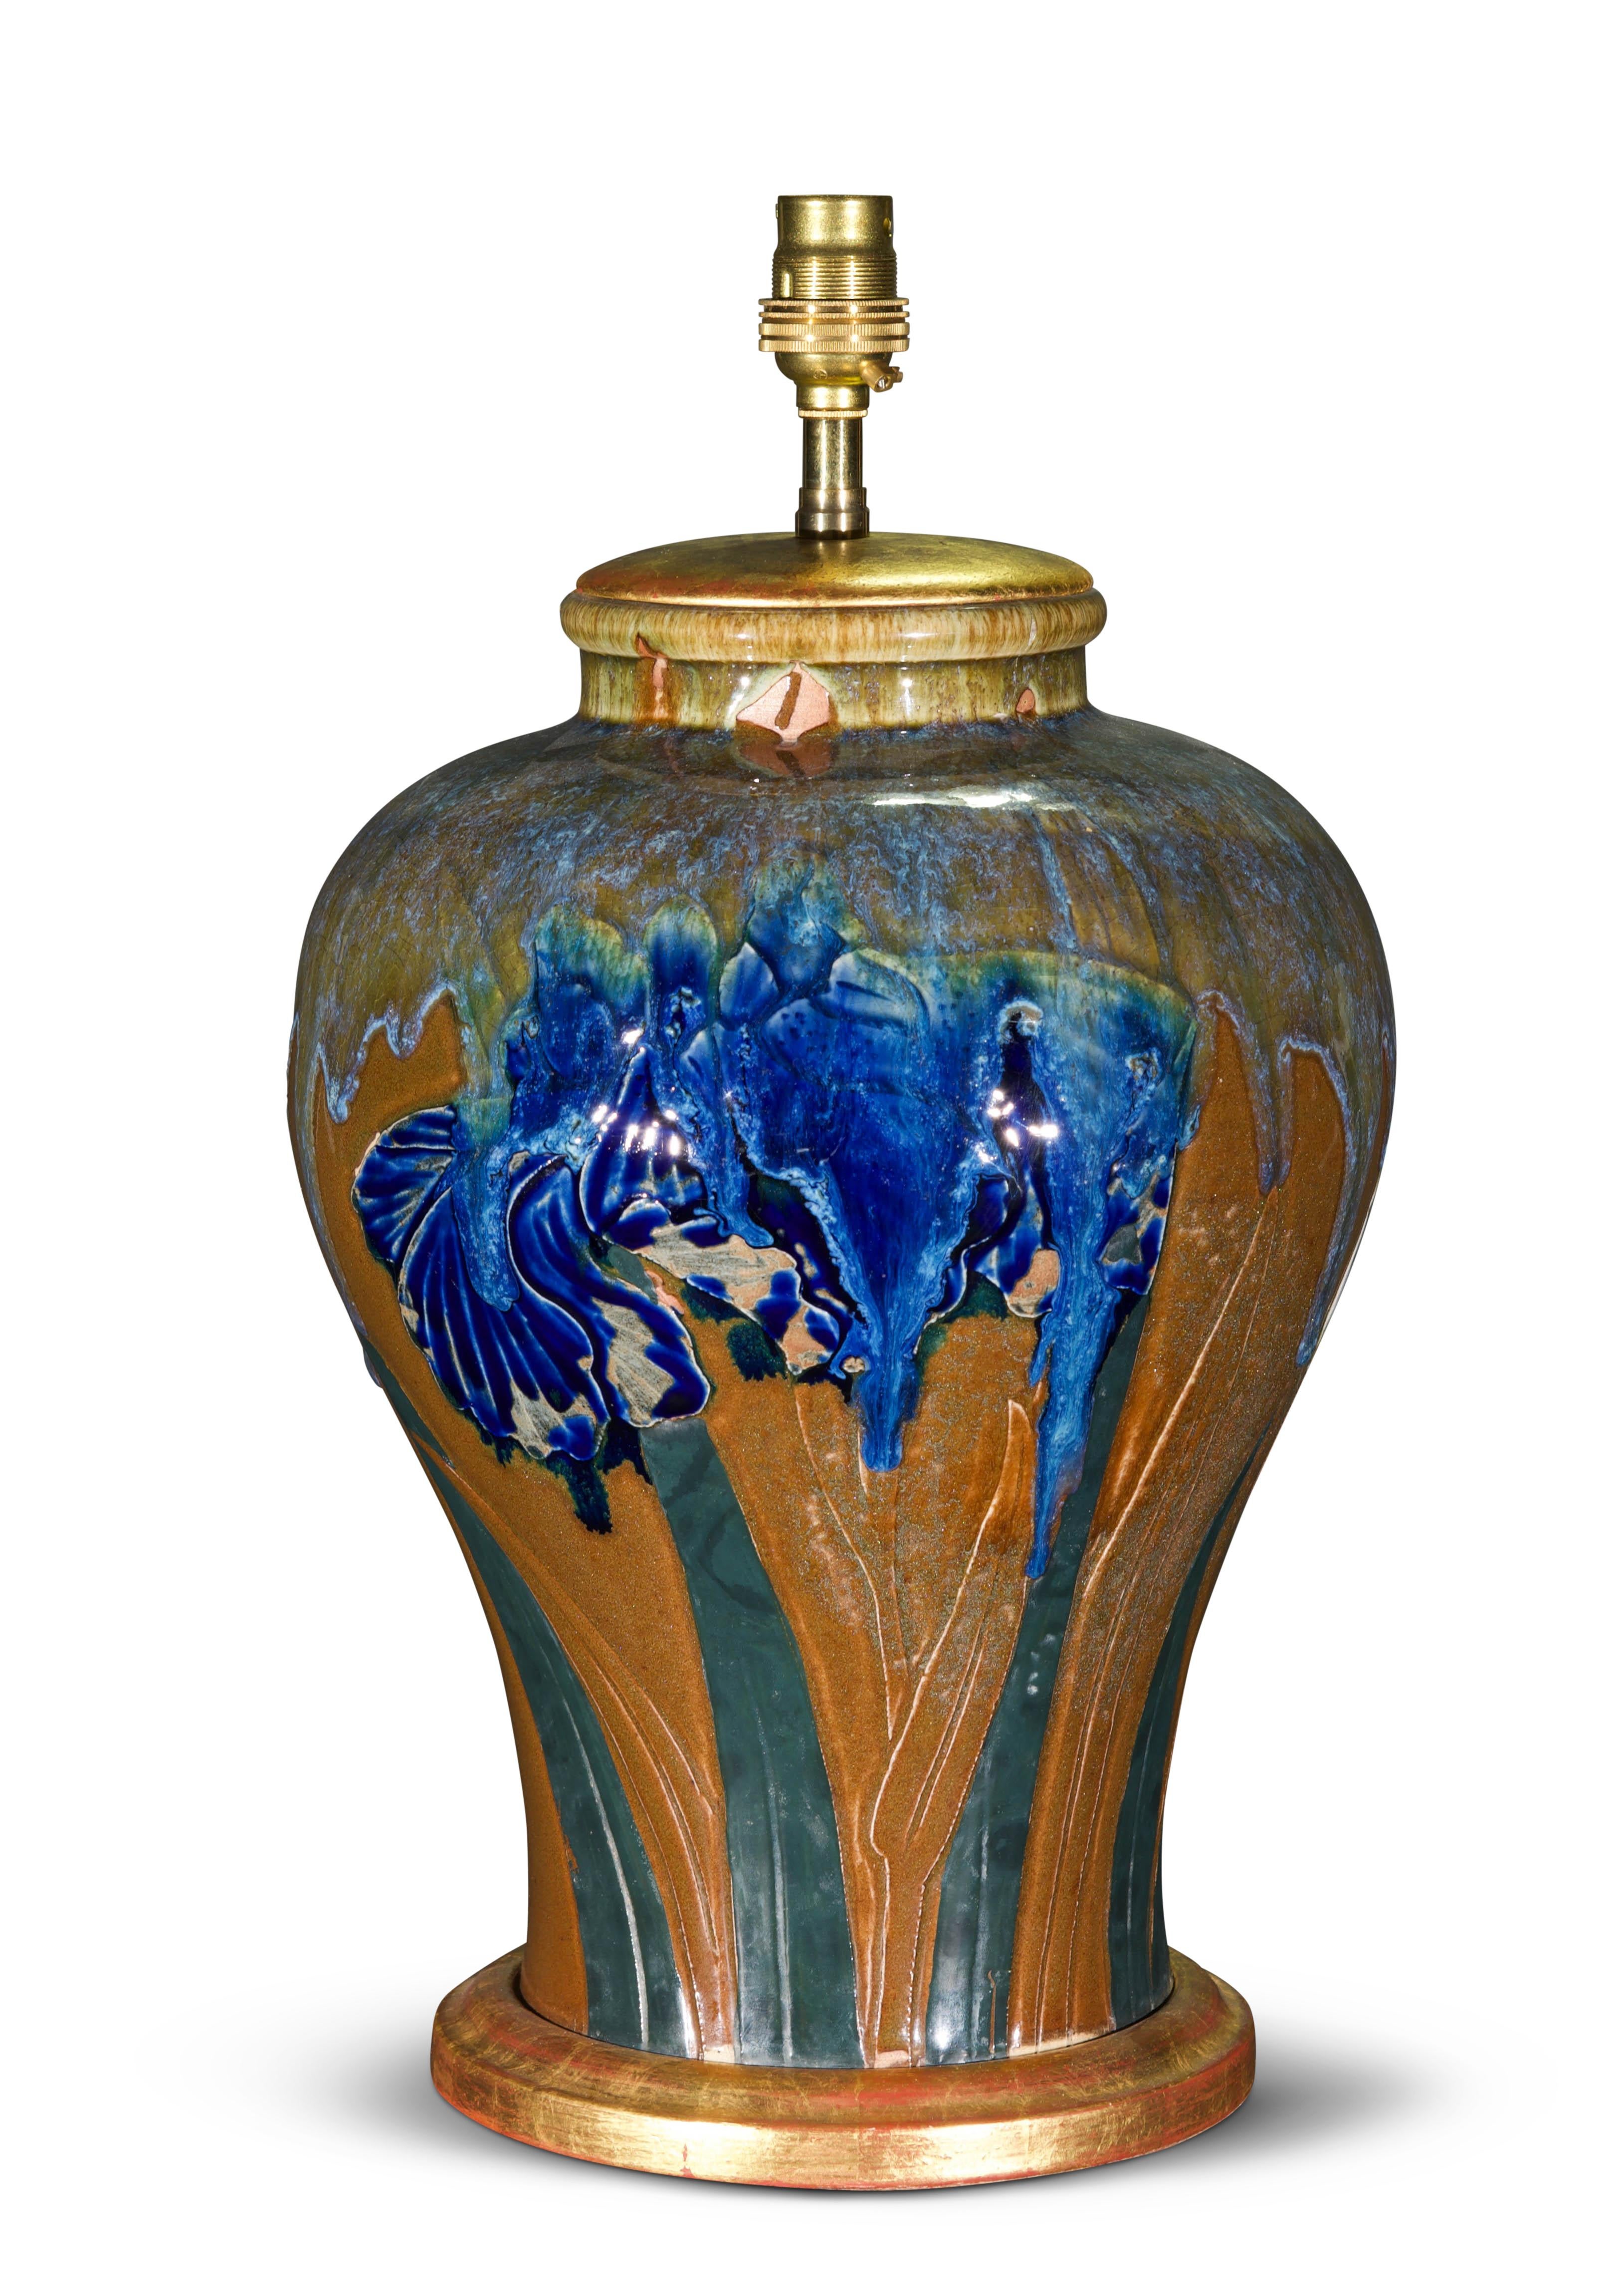 A very charming flambé-glazed vase, decorated with painted irisies, now mounted as a table lamp, with a hand-gilded turned base.

Height of vase: 13 in (33 cm) including giltwood base, excluding electrical fitment and lampshade.

All of our